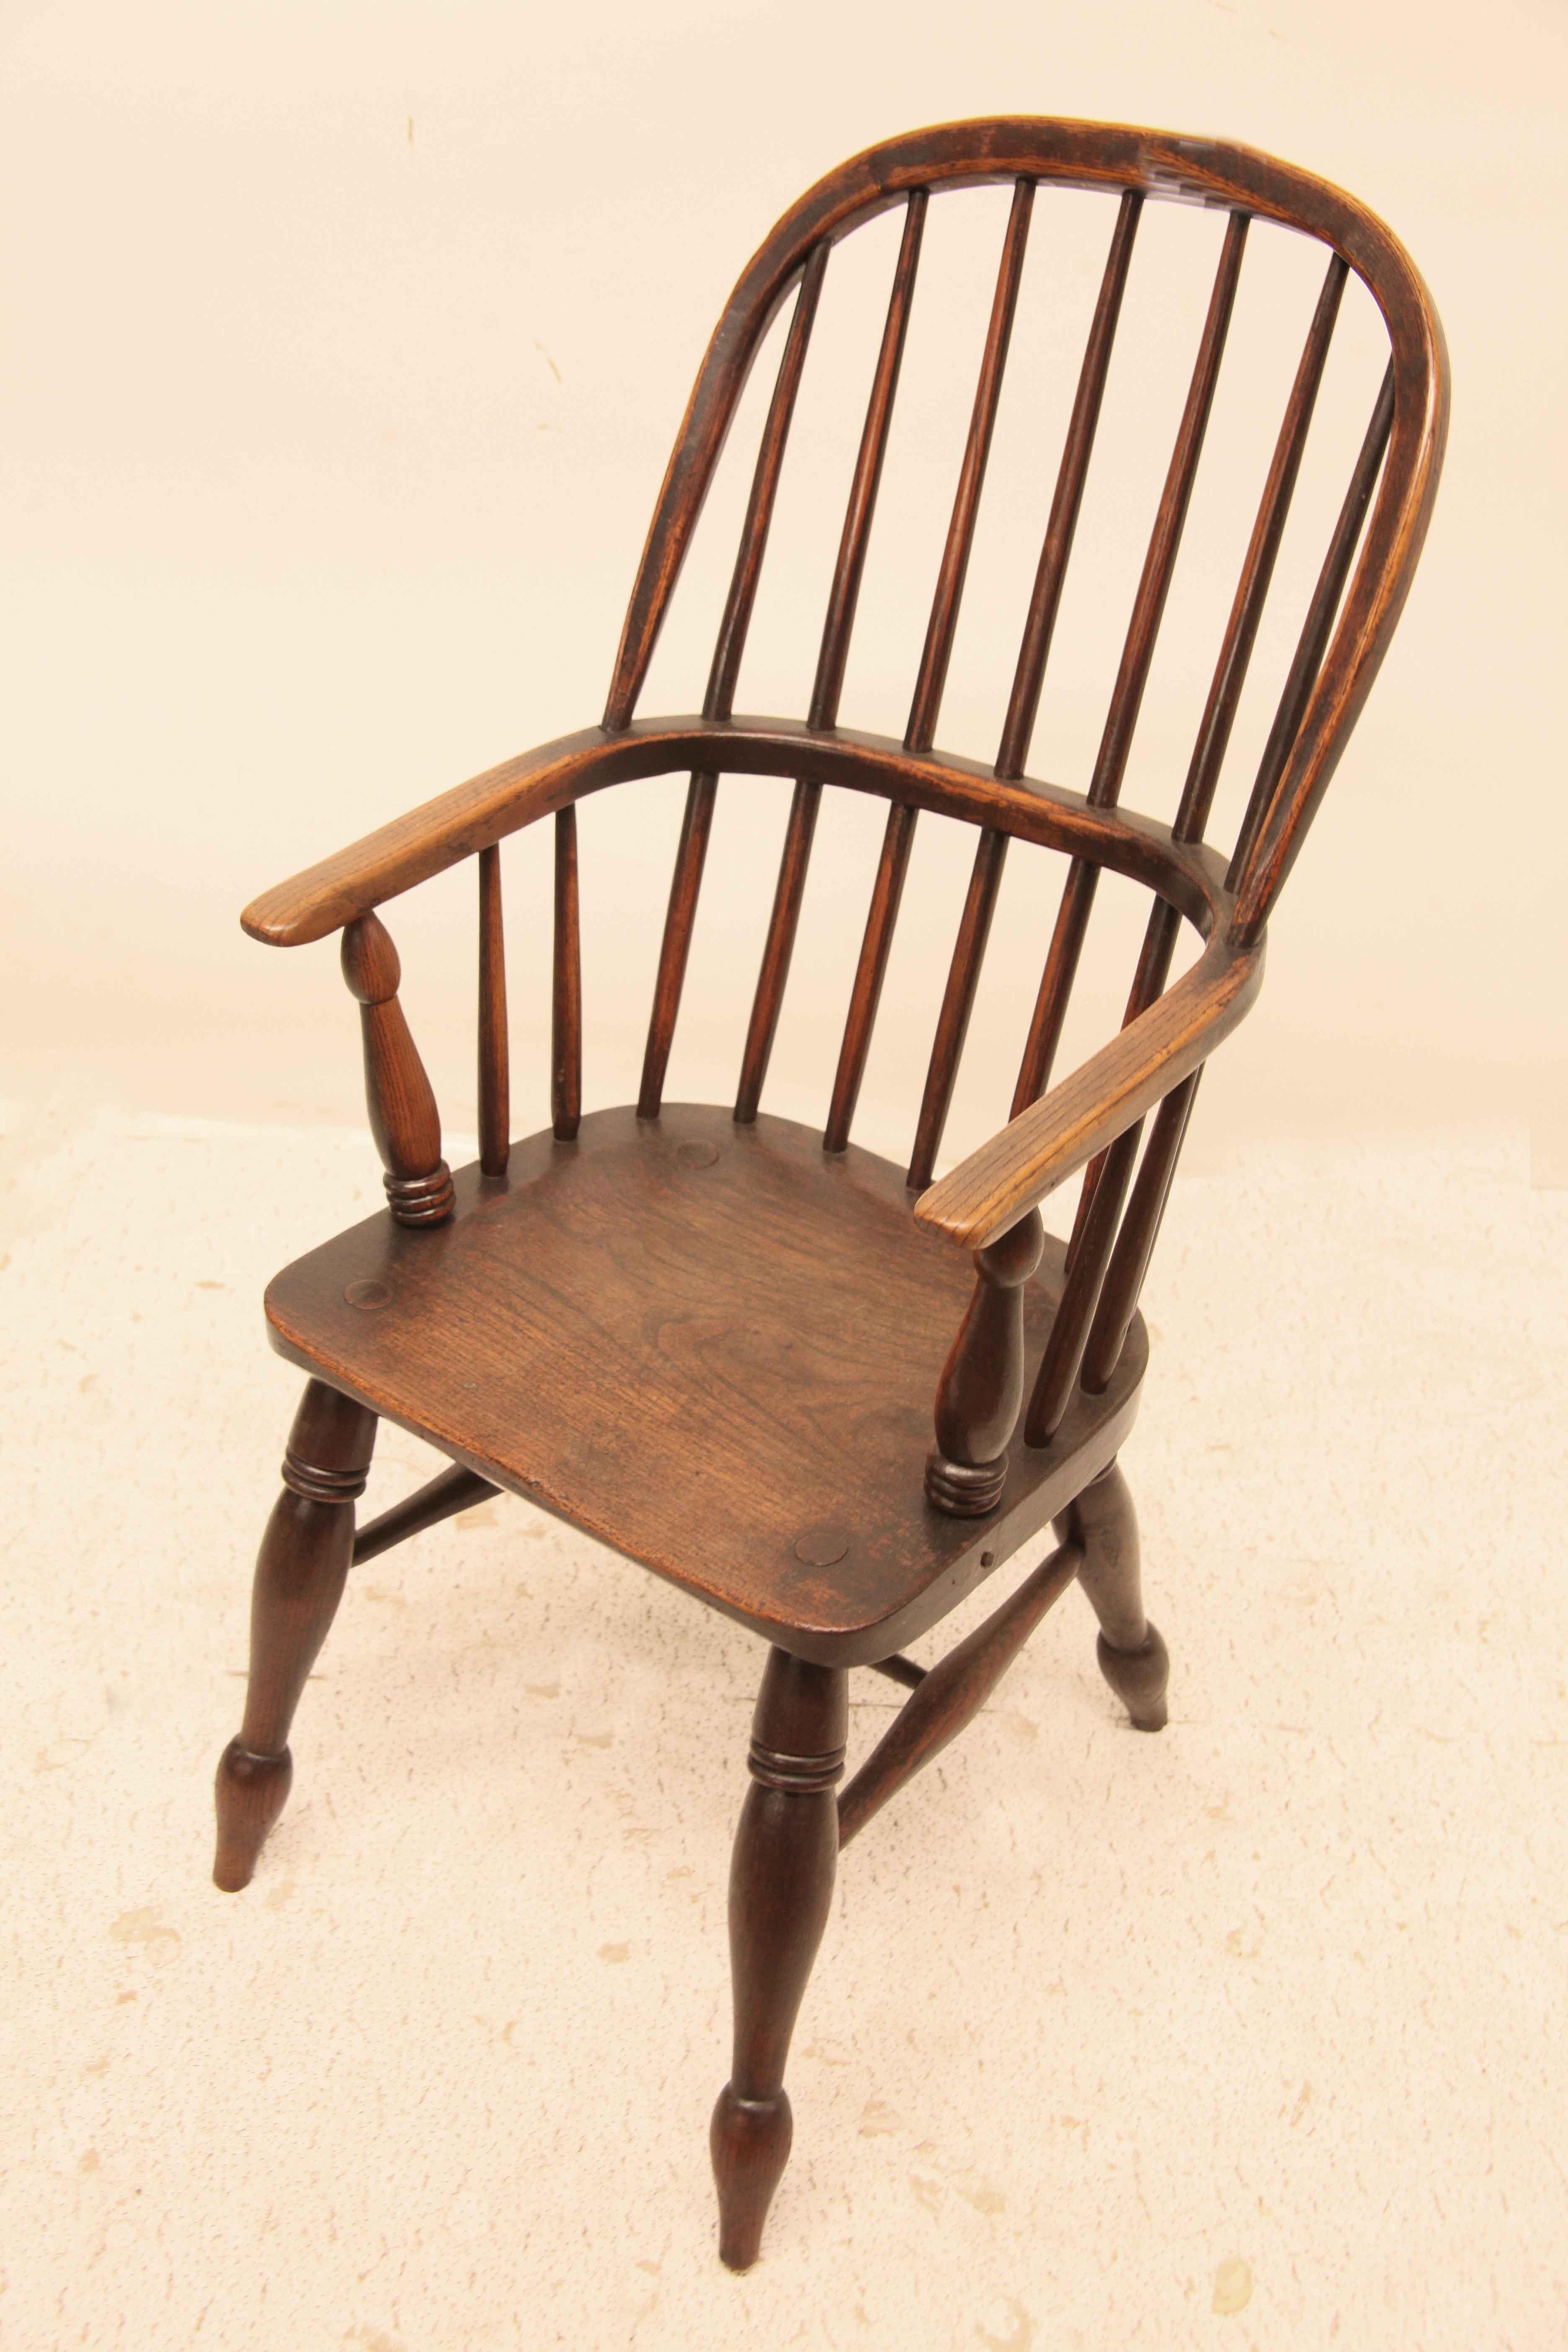 Turned English Windsor Youth Chair